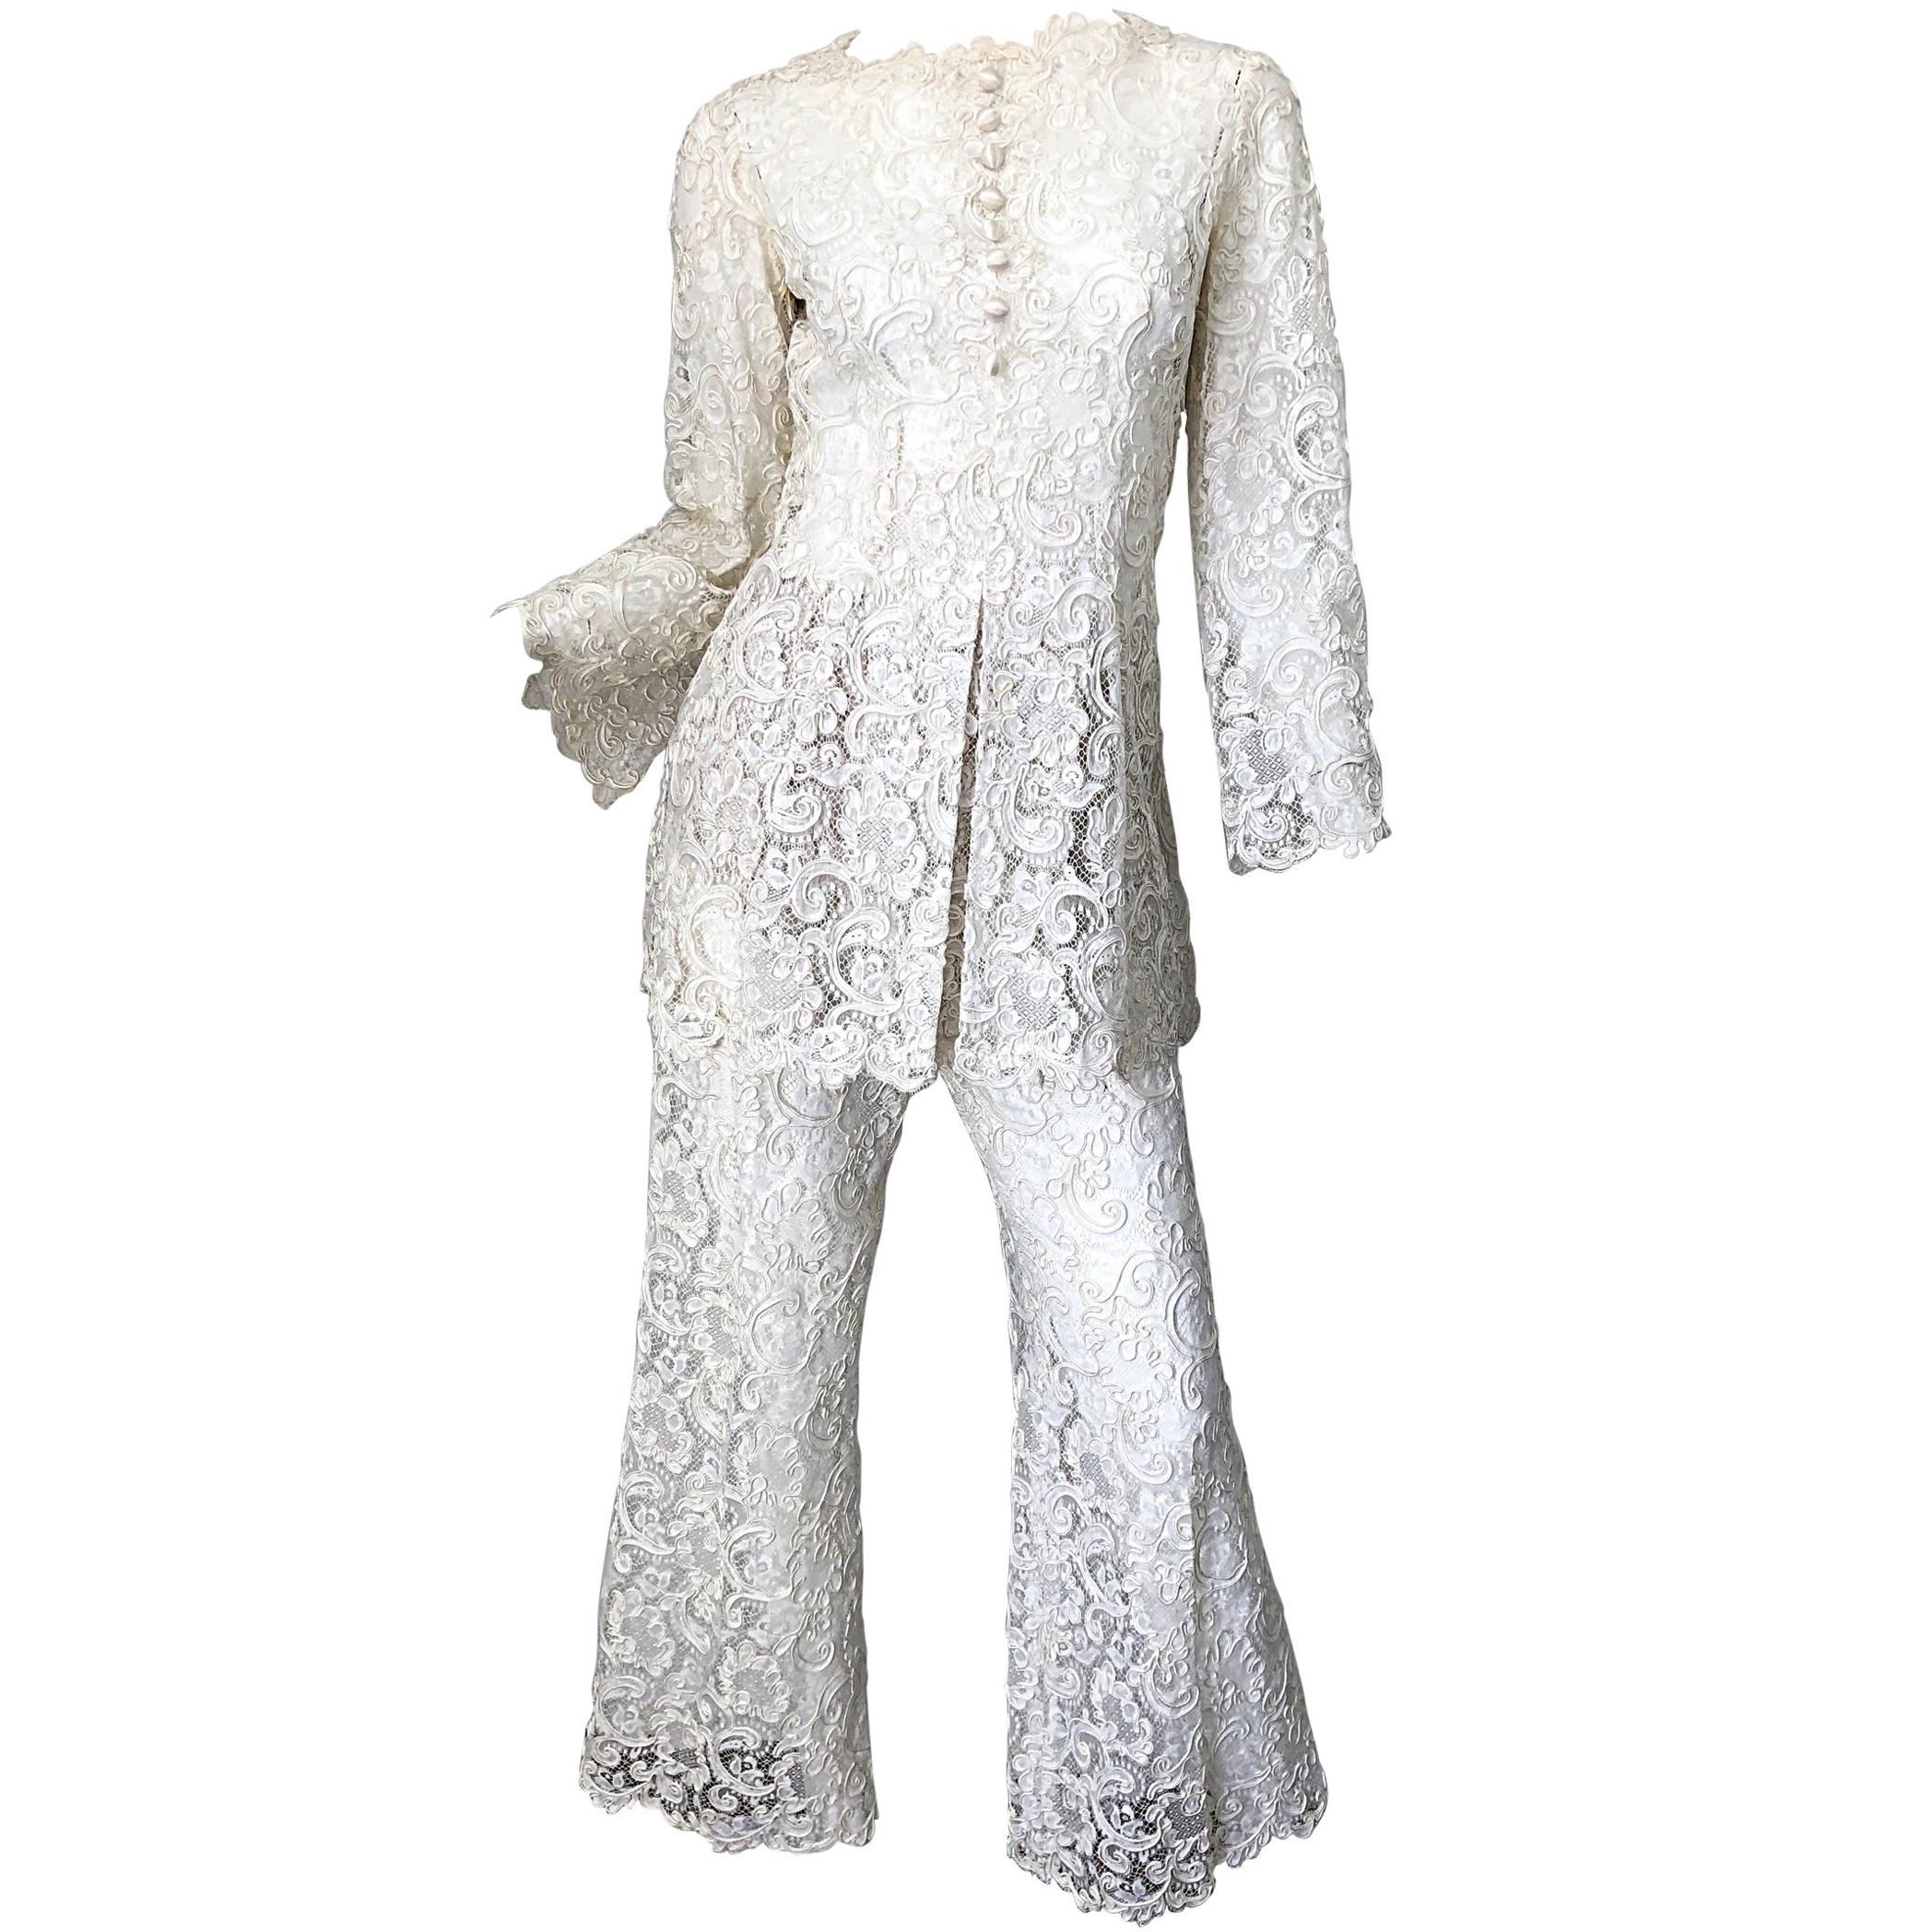 Yves Saint Laurent YSL 1970s Rare Ivory Belgium Lace 70s Tunic and Flared Pants